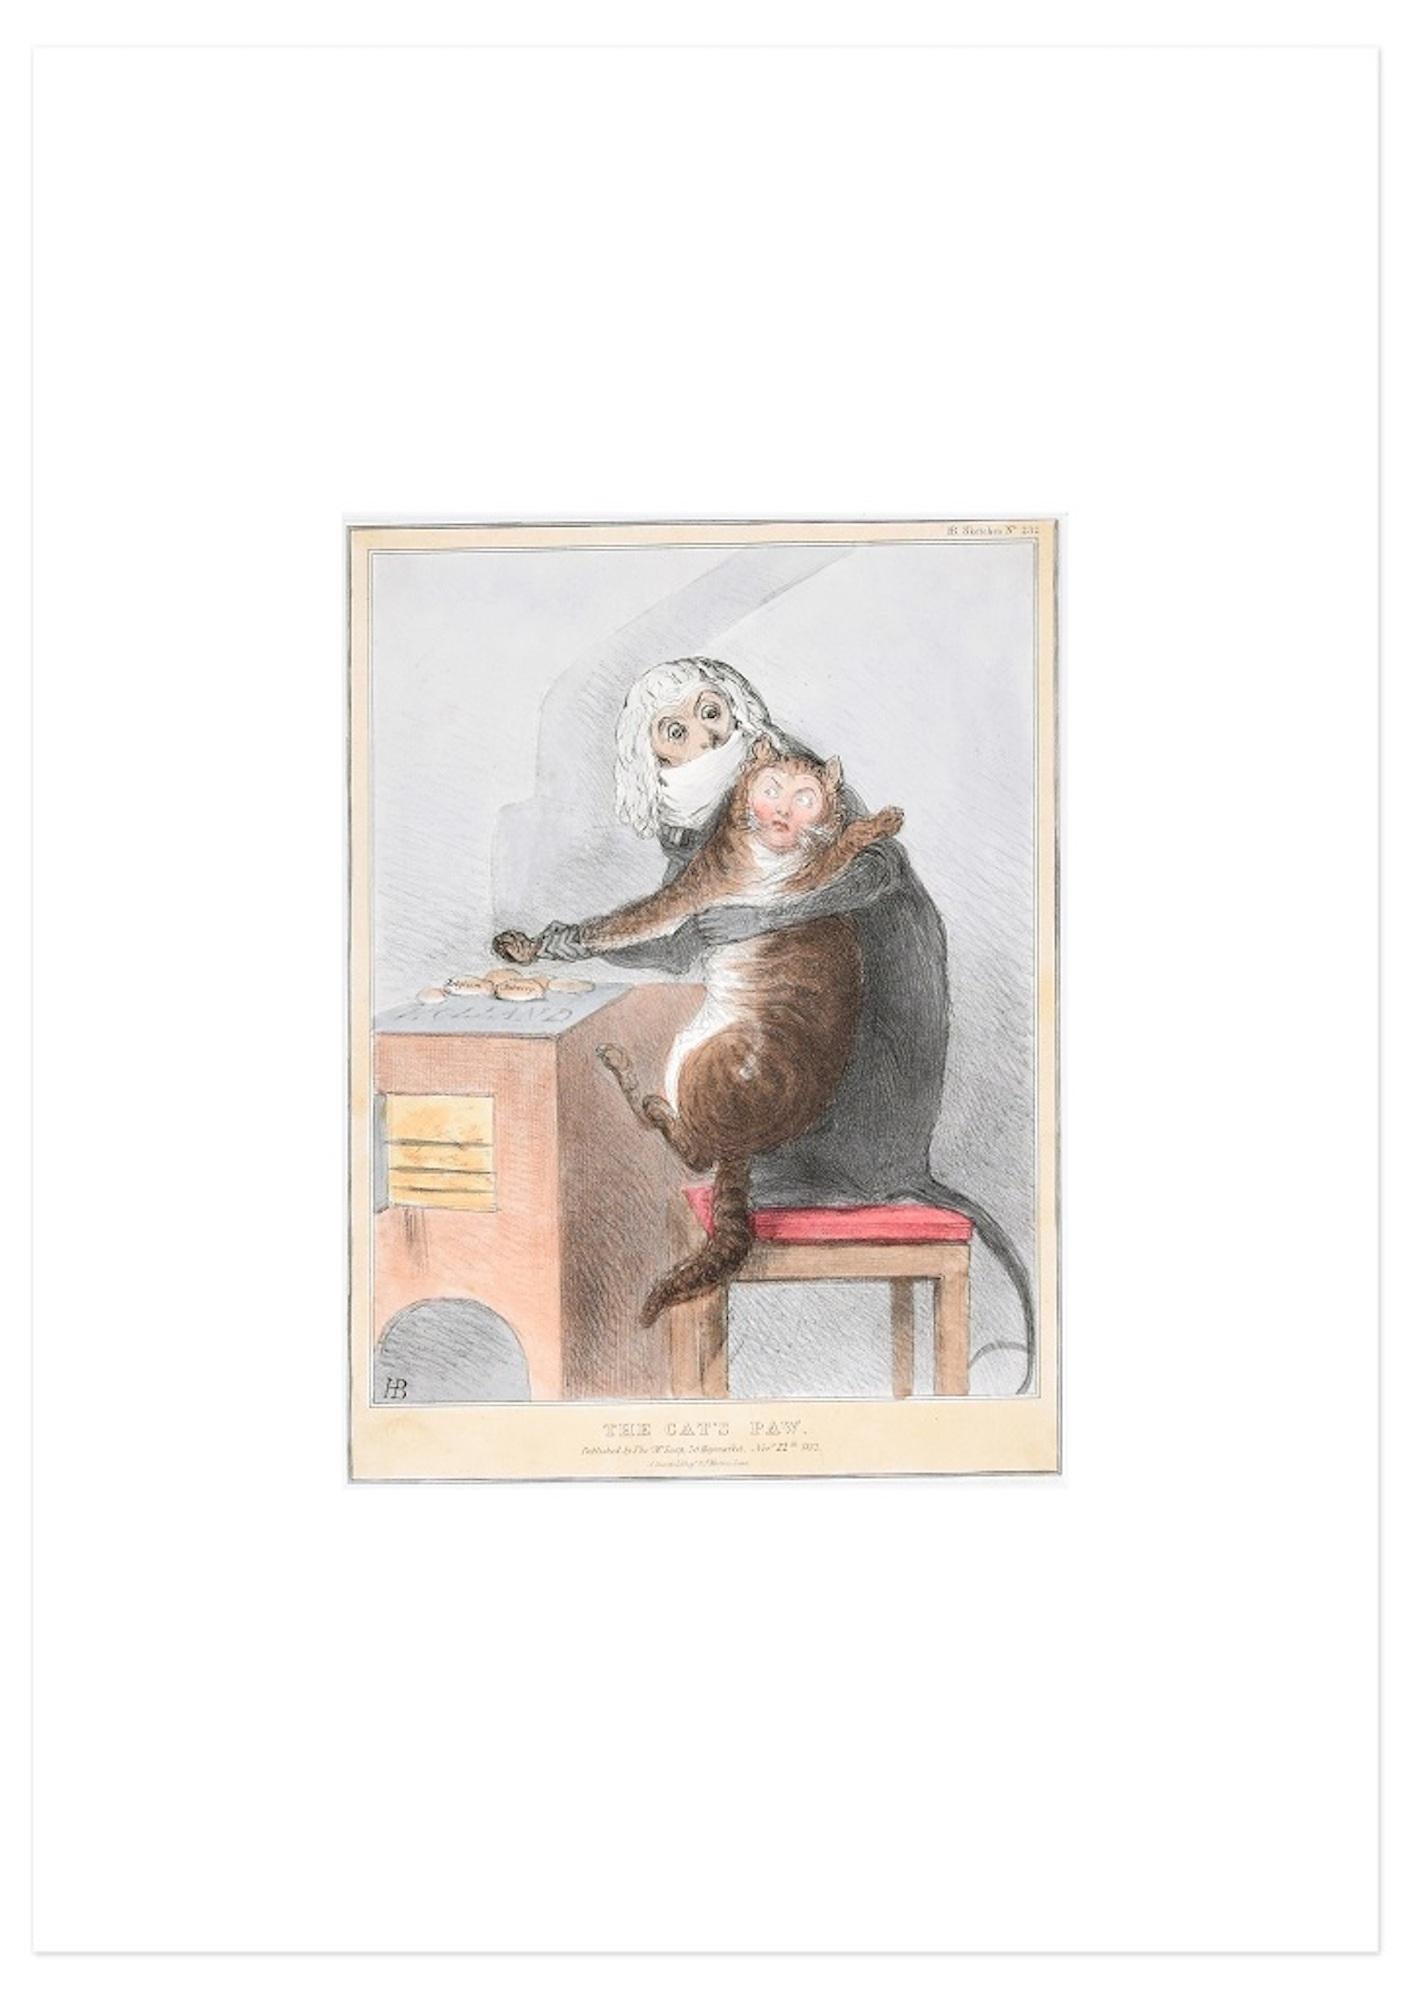 The Cat's Paw  – Reform Bill! - Lithograph by J. Doyle - 1831 - Print by John Doyle